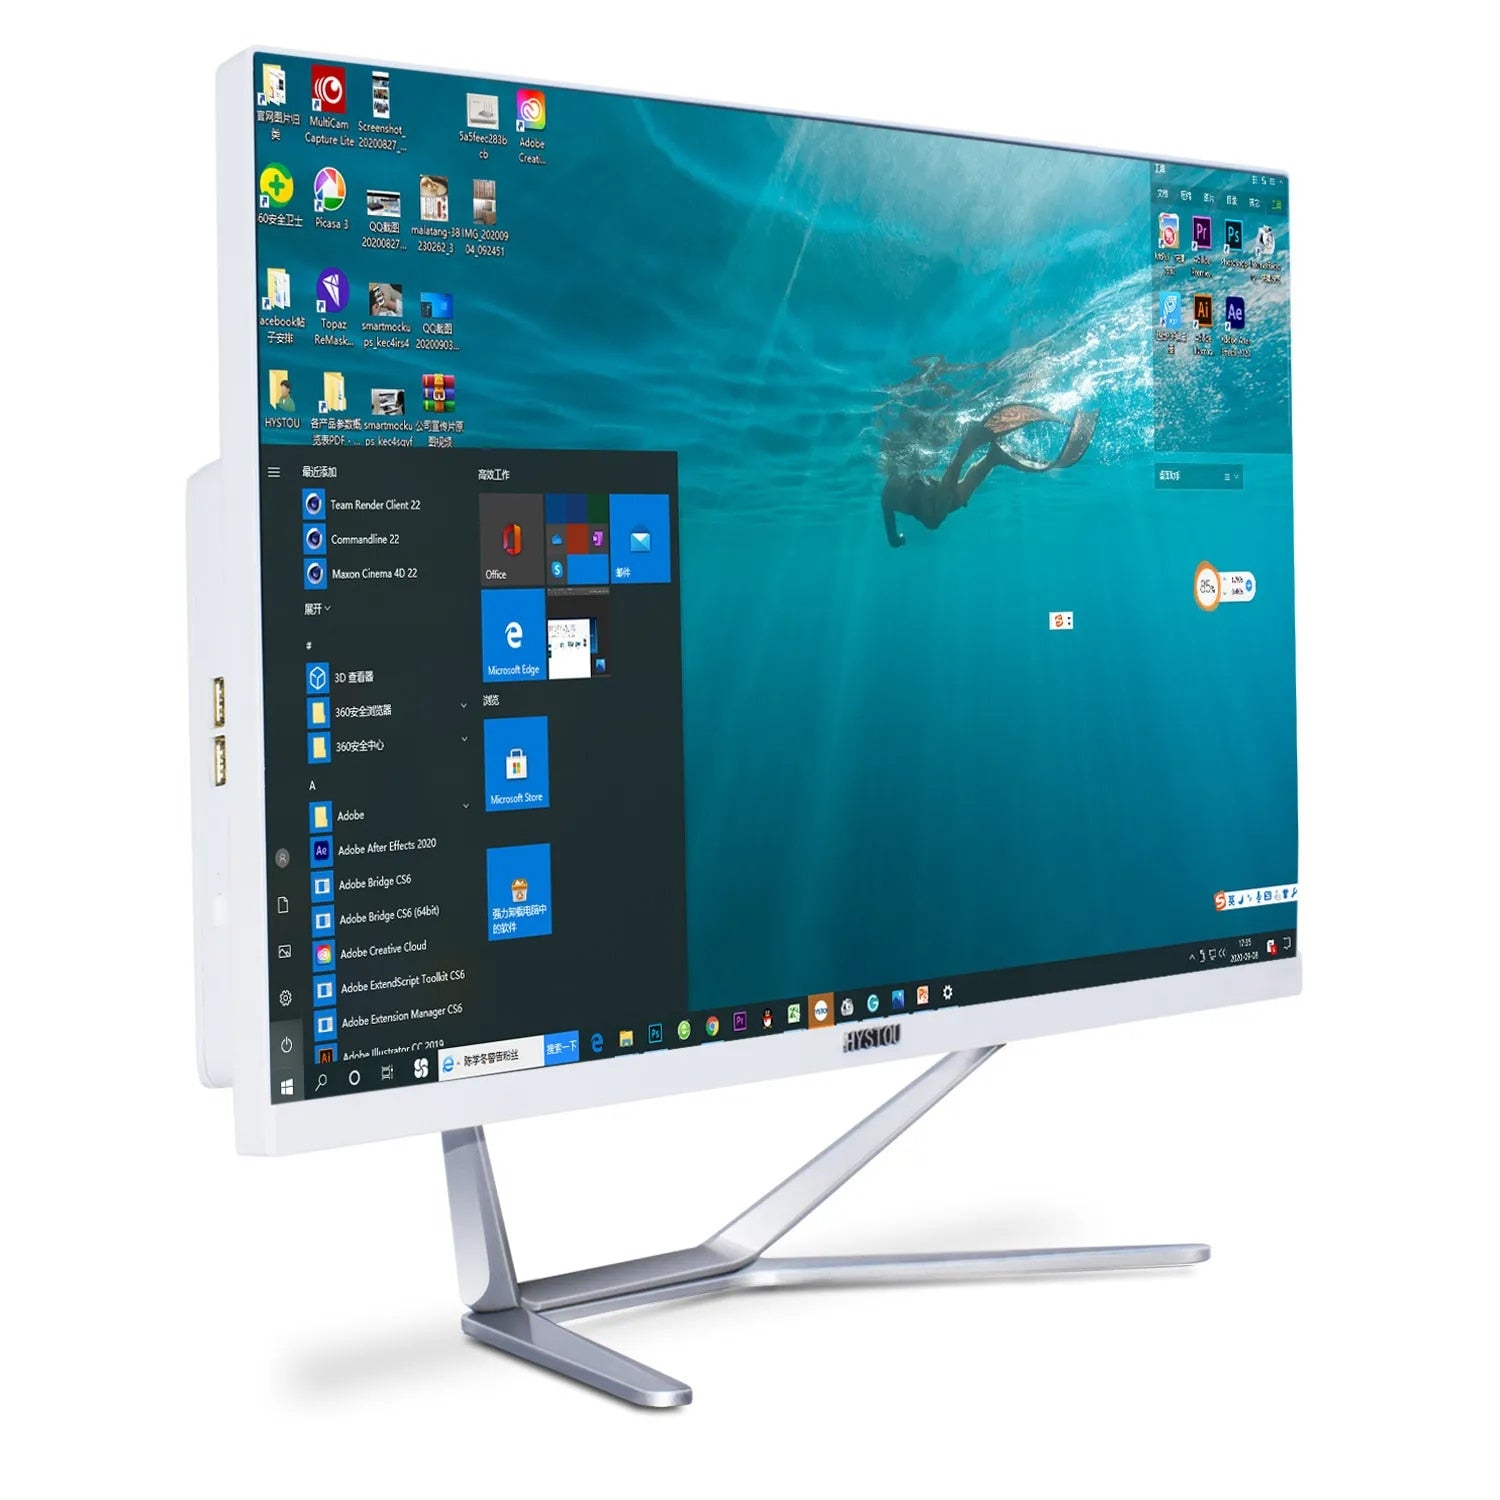 HYSTOU Factory Home Office Computer 23.8 Inch Core i5 i7 32GB DDR4 LCD Screen HD 4K  All In One Desktop PC